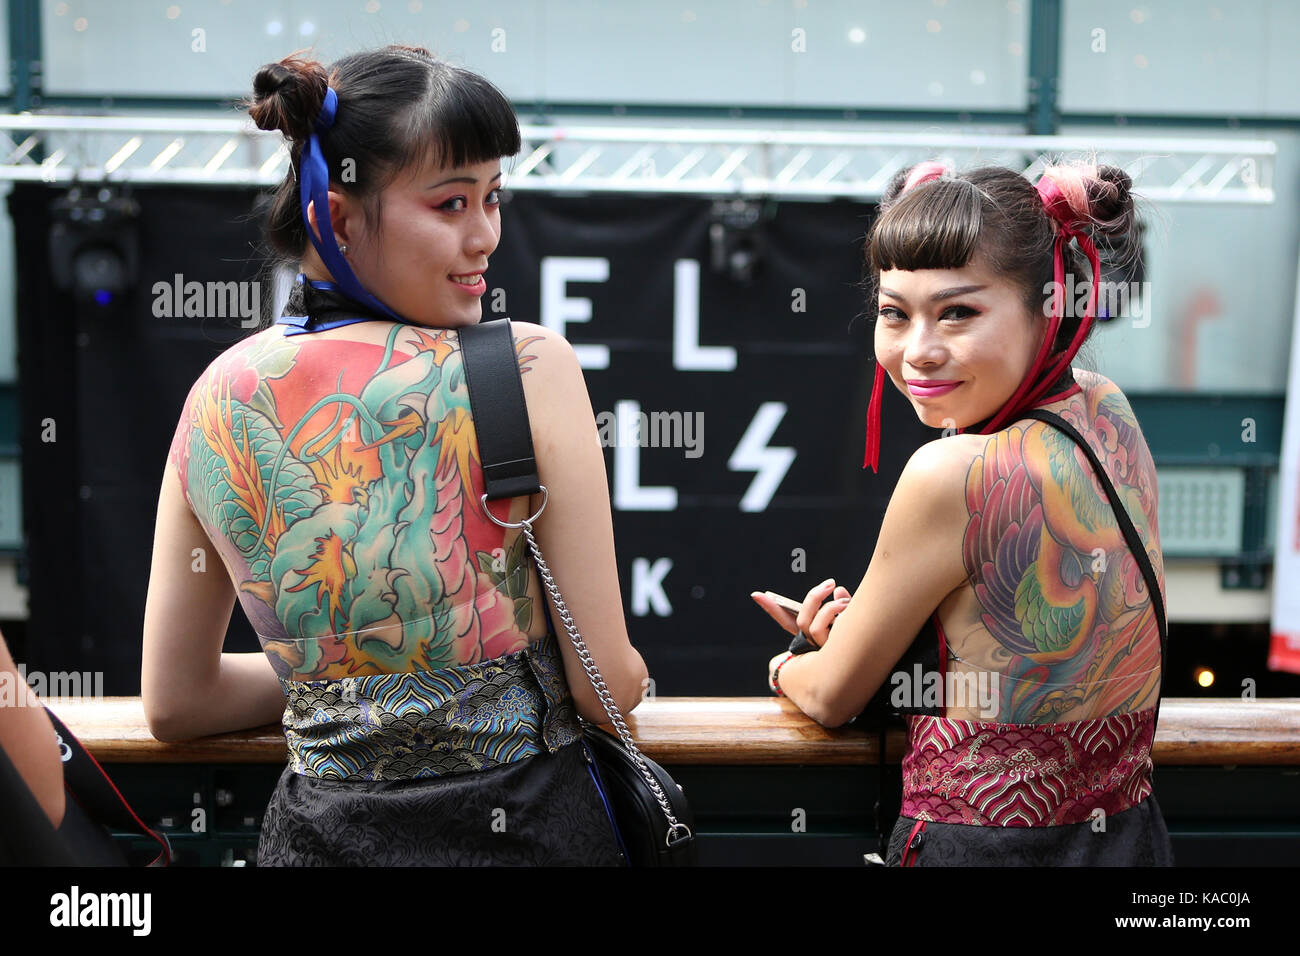 Tattooed back of two women at The International London Tattoo Convention 2017, Tobacco Dock, London, UK. Stock Photo